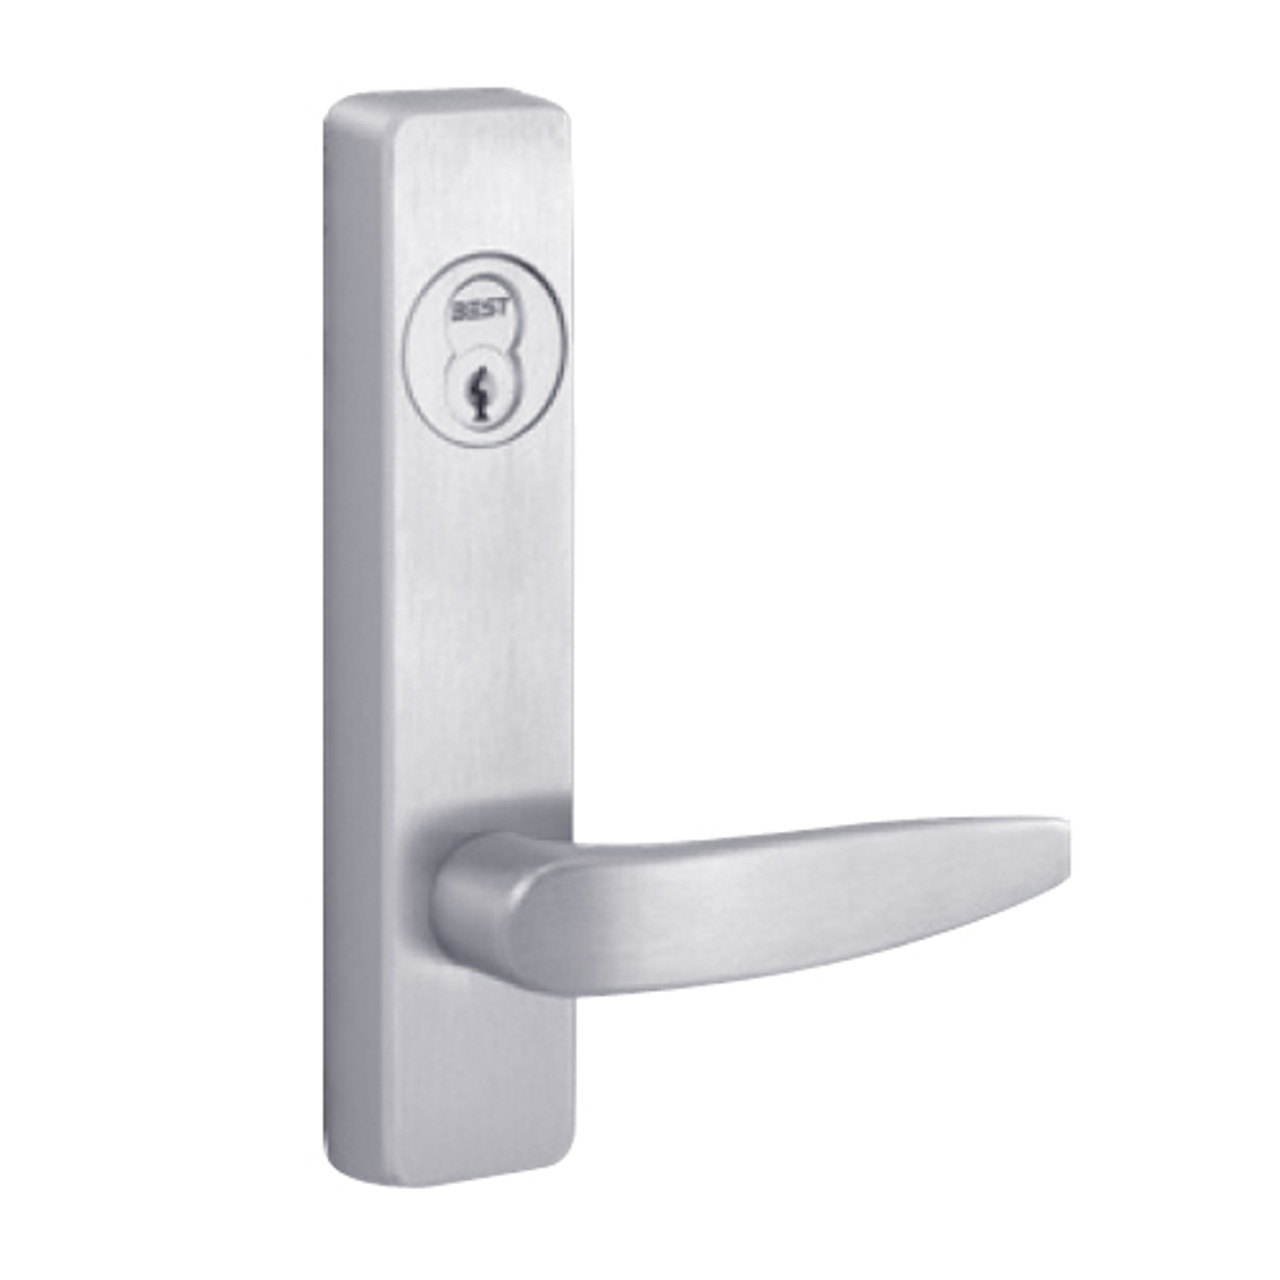 2903B-625-RHR PHI Key Retracts Latchbolt Trim with B Lever Design for Apex Series Narrow Stile Door Exit Device in Bright Chrome Finish